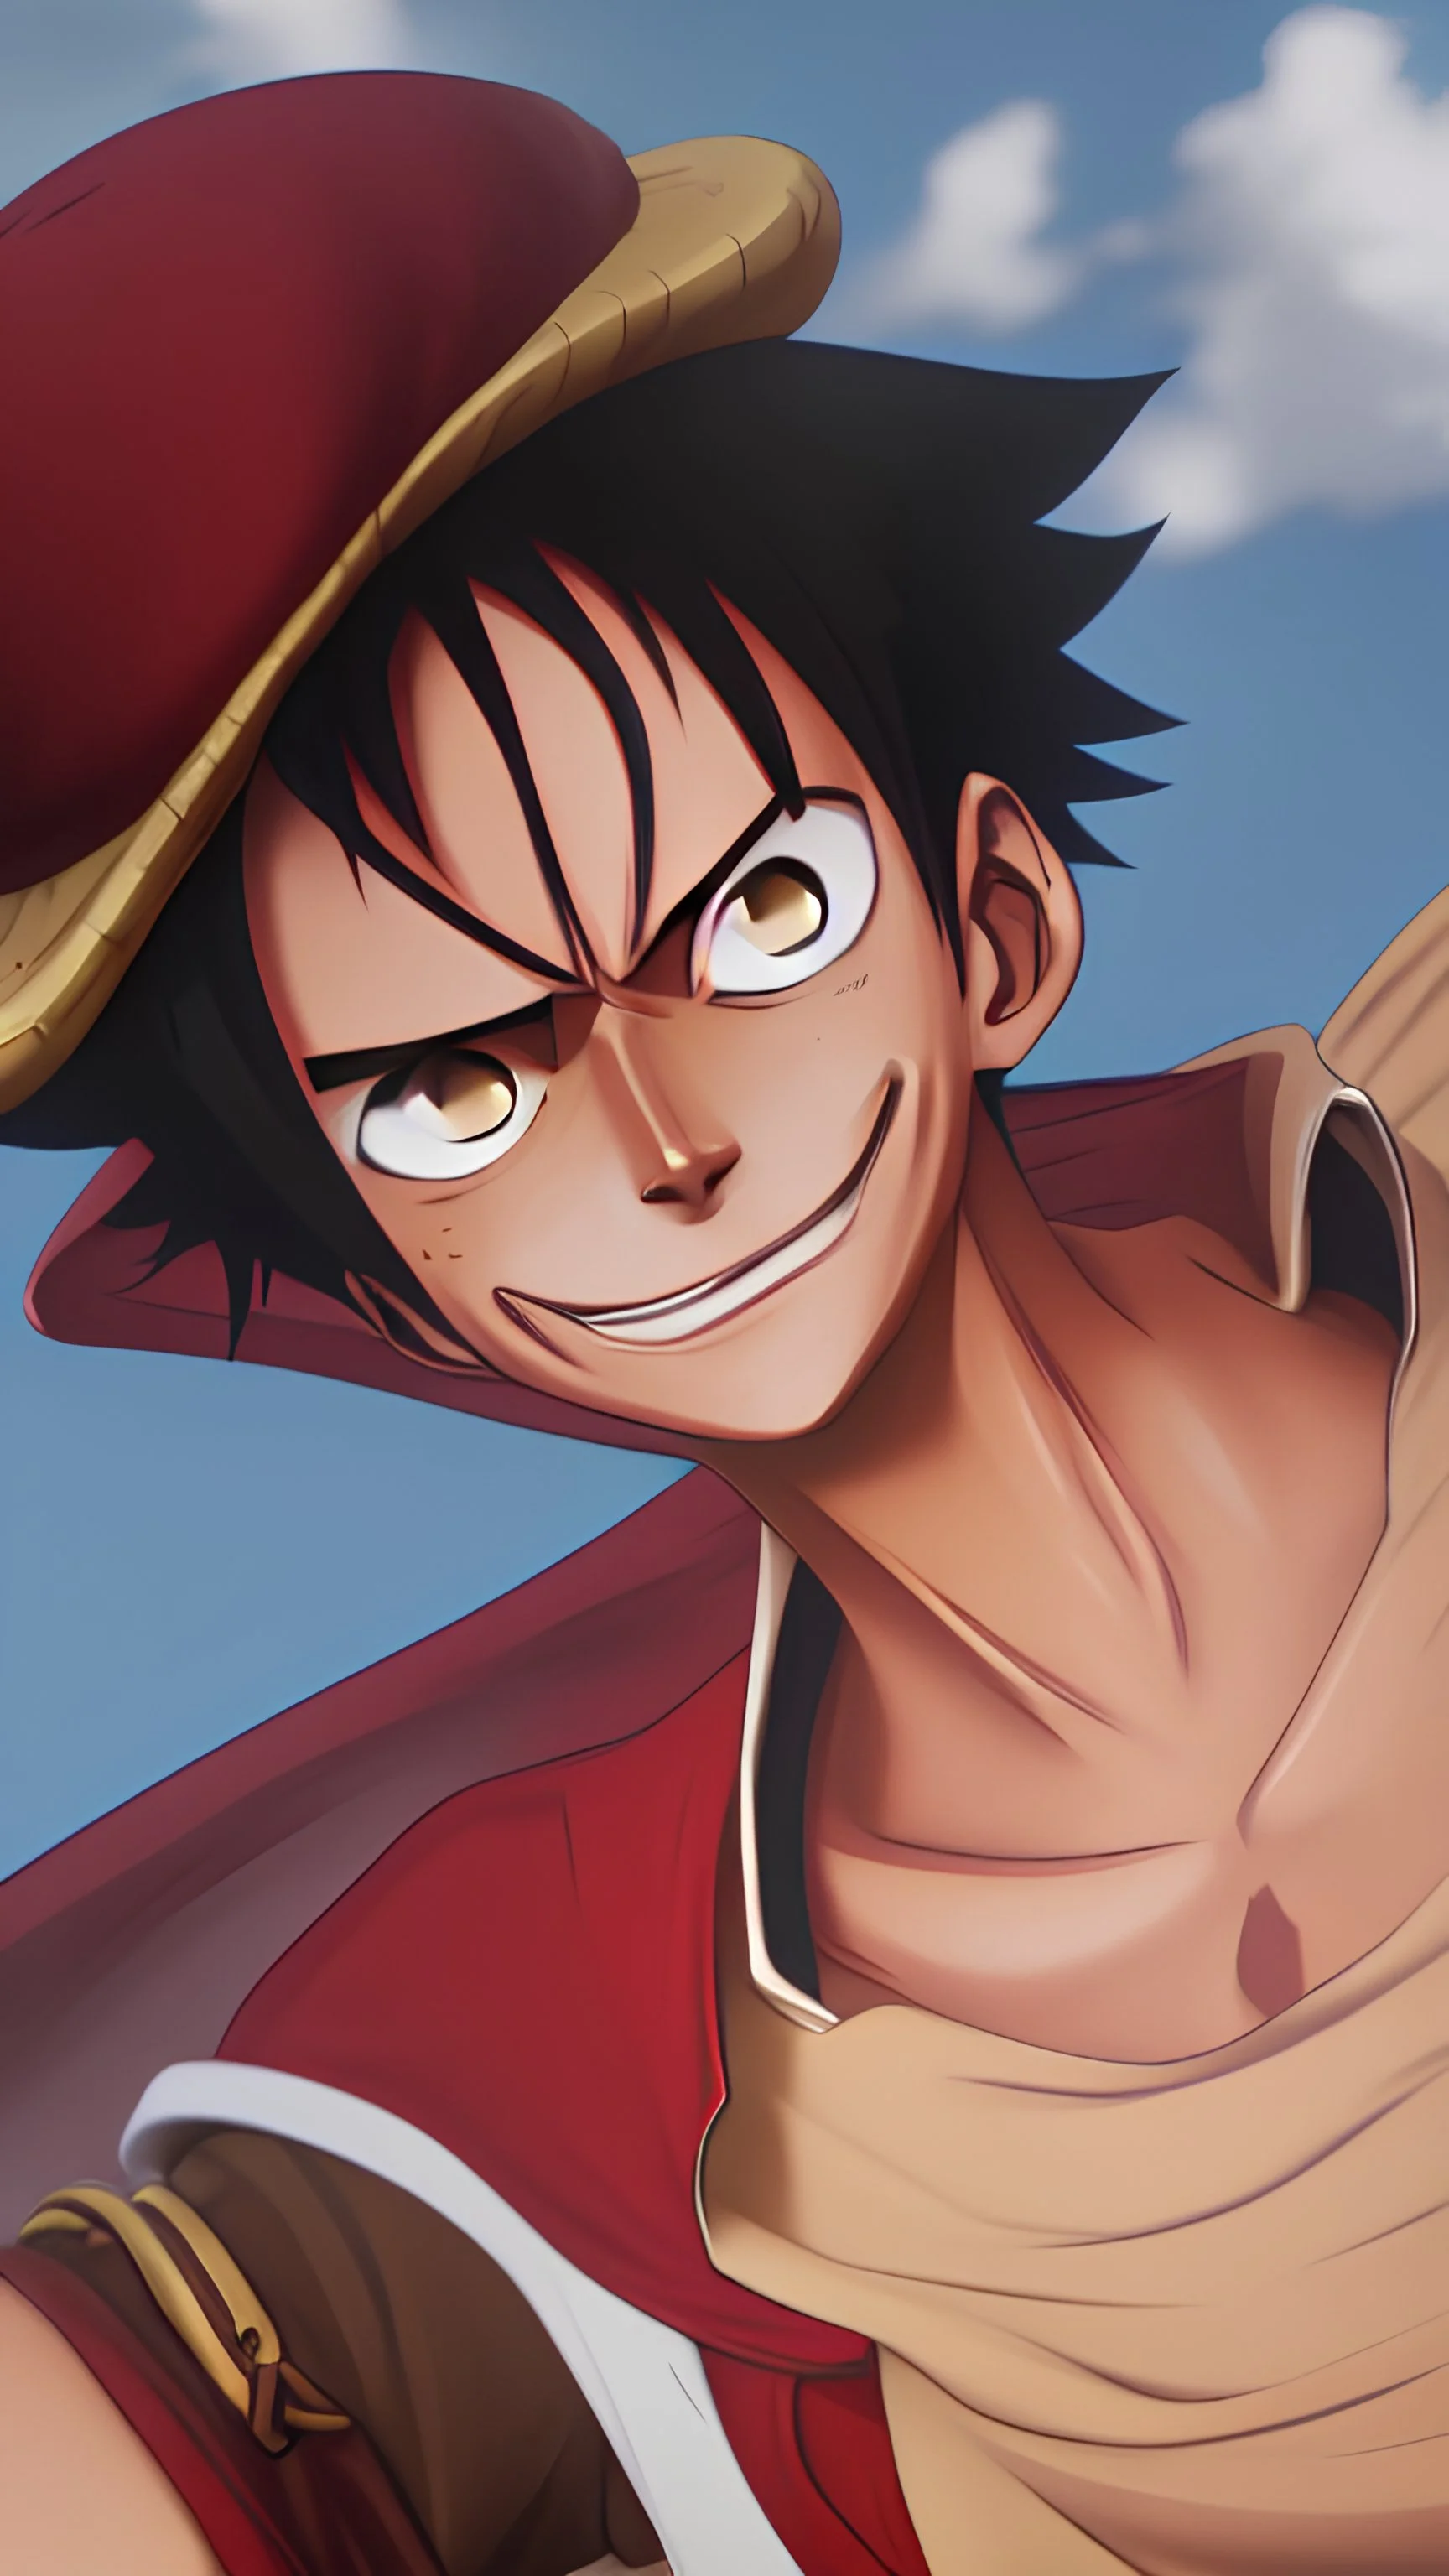 Luffy from One Piece anime fulfills his dream and becomes a pirate wi-fi